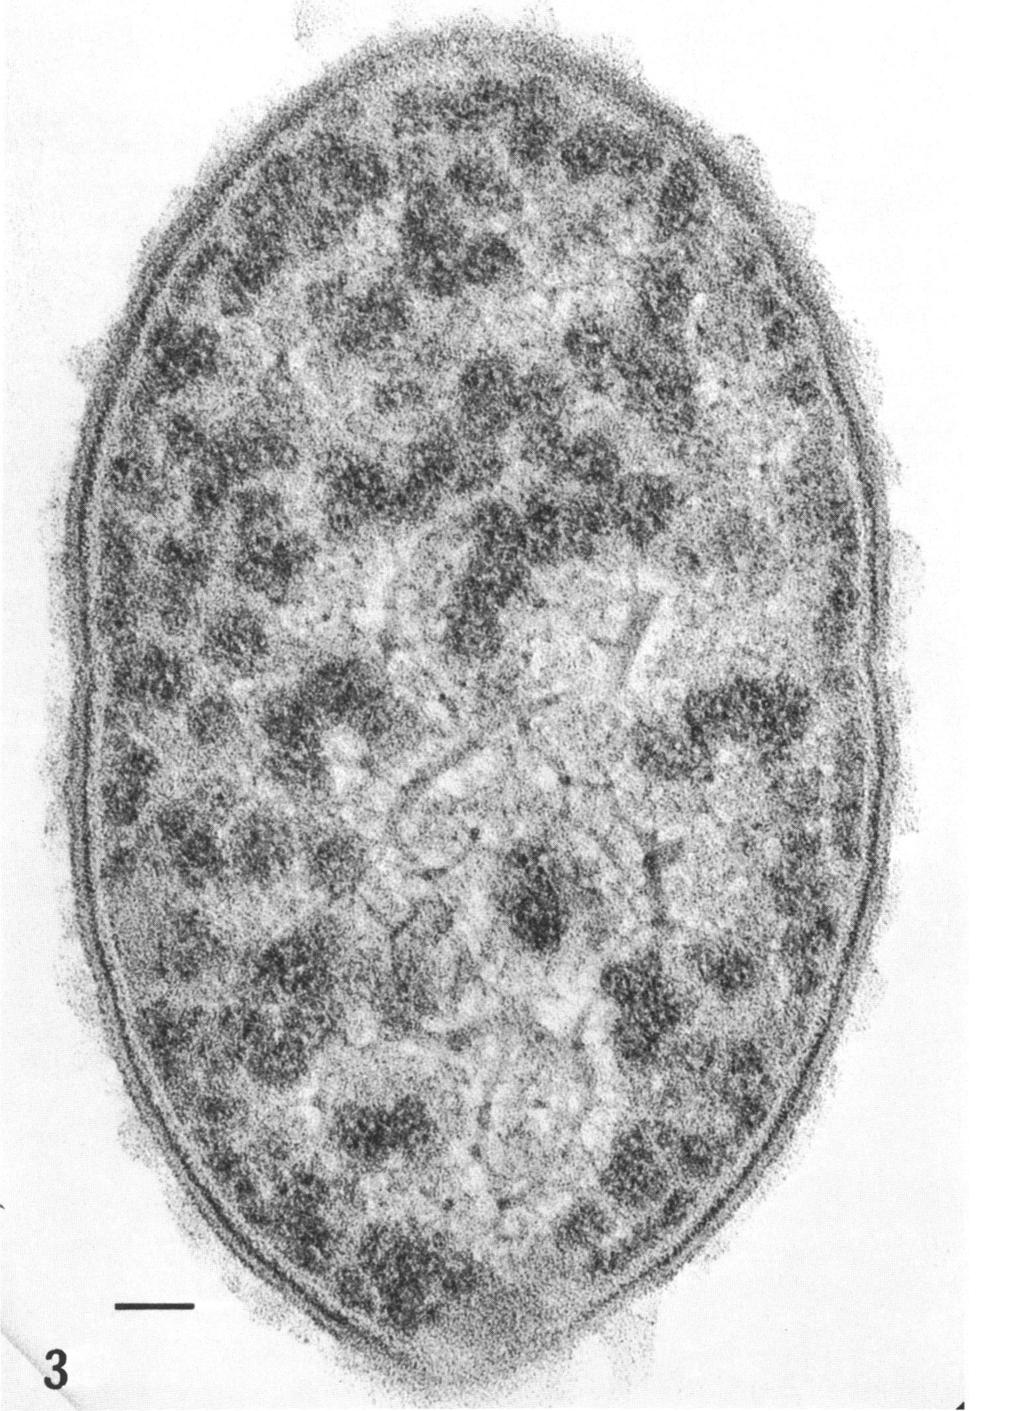 VOL. 97, 1969 ALTERATION IN BACTERIAL MORPHOLOGY BY OPTOCHIN 365 FIG. 3. Opt-r70 pneumococcus incubated at 37 C for 30 min with I mg of optochin HCI per ml. X 200,000.